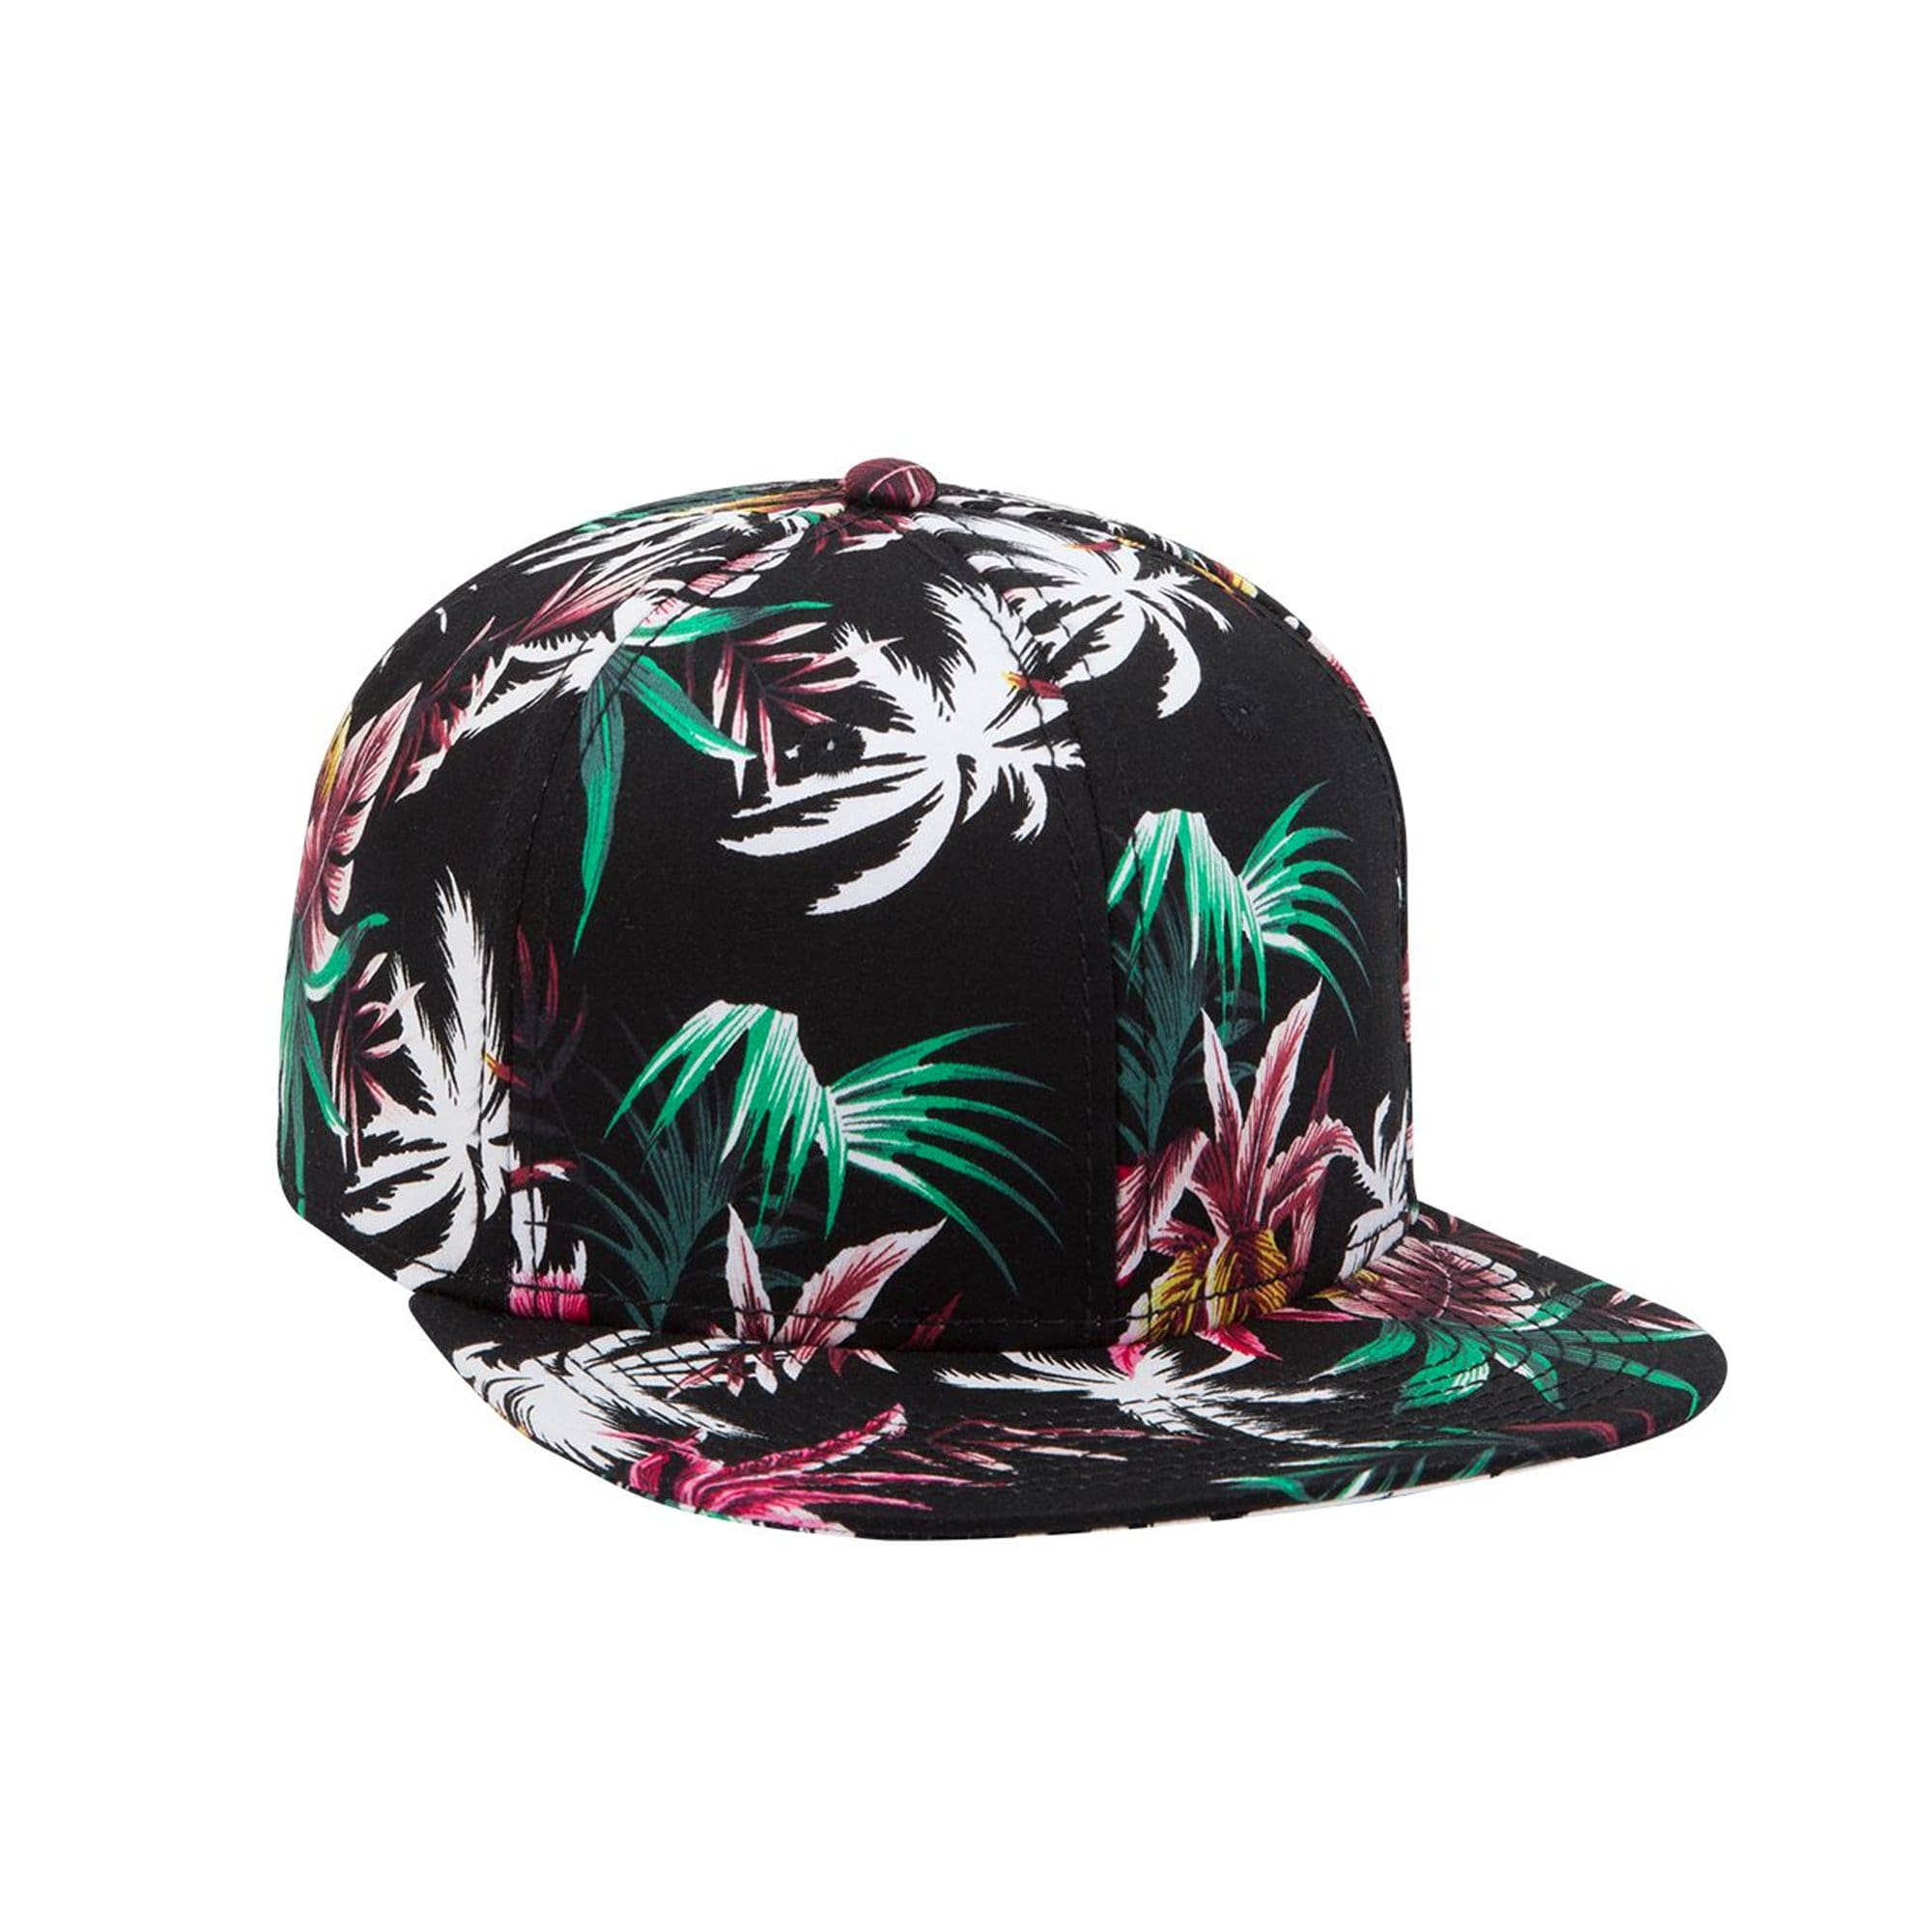 Hawaiian pattern snapback hat for embroidery or screen print at Black ...